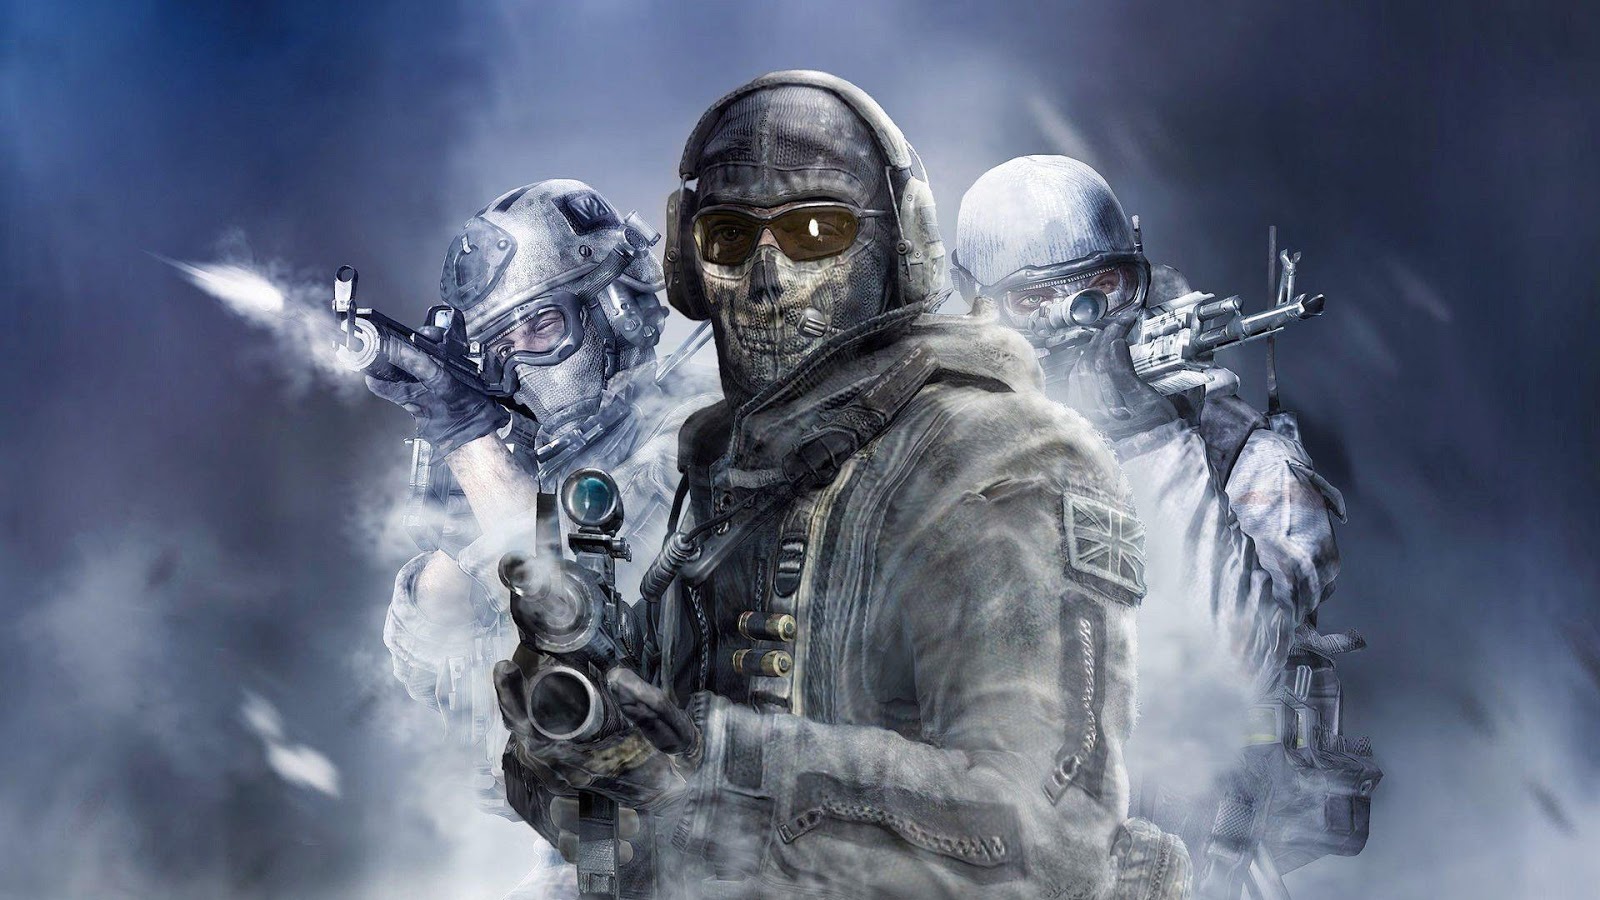 wallpapers call of duty,personal protective equipment,cg artwork,games,action adventure game,digital compositing